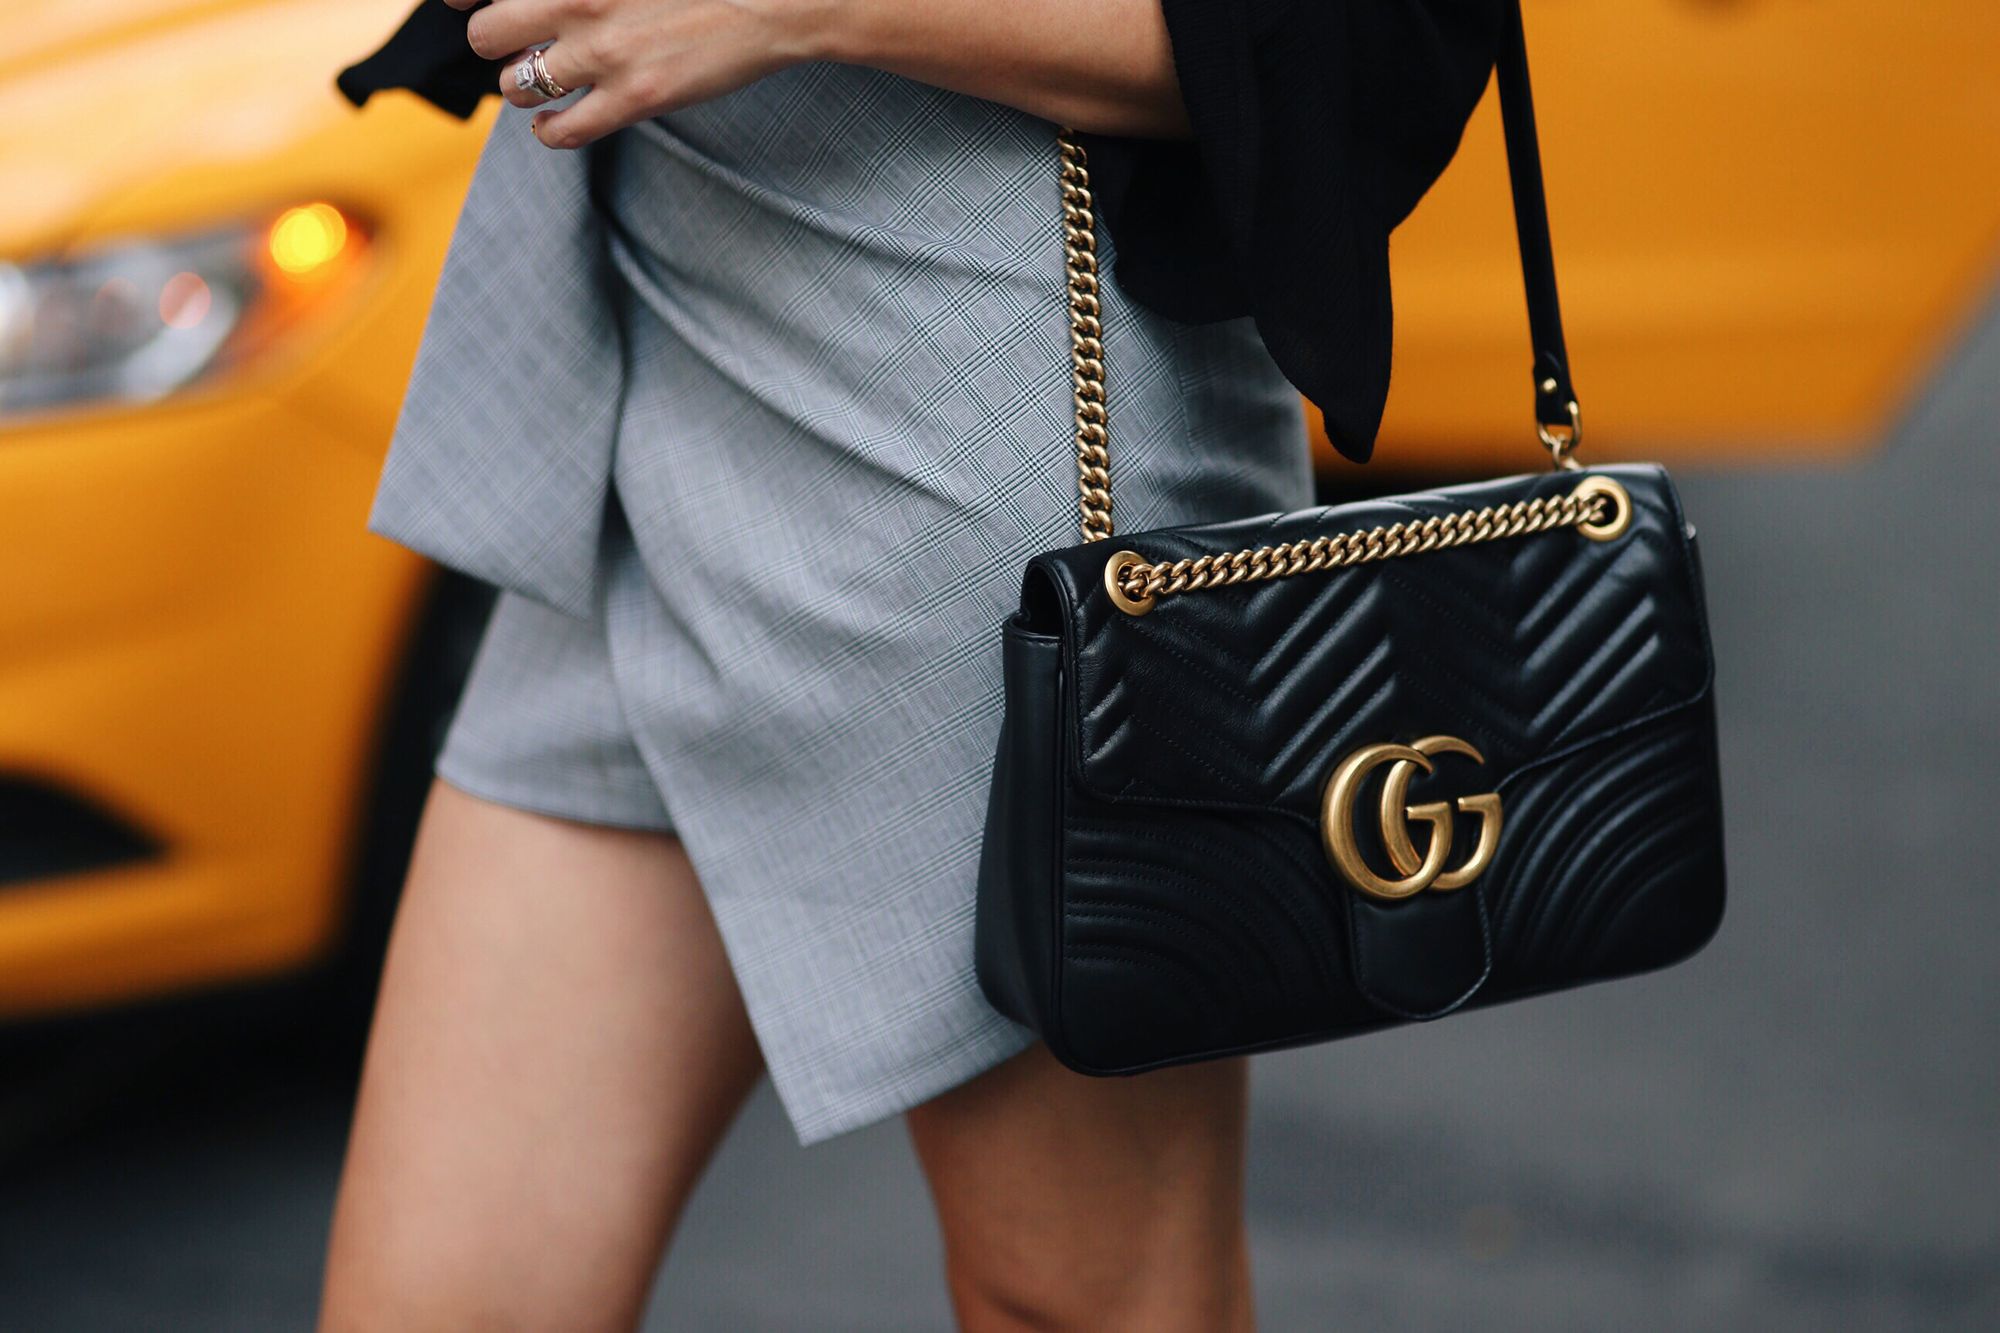 Iconic Gucci Handbags You Should Be Investing In | Luxity Blog